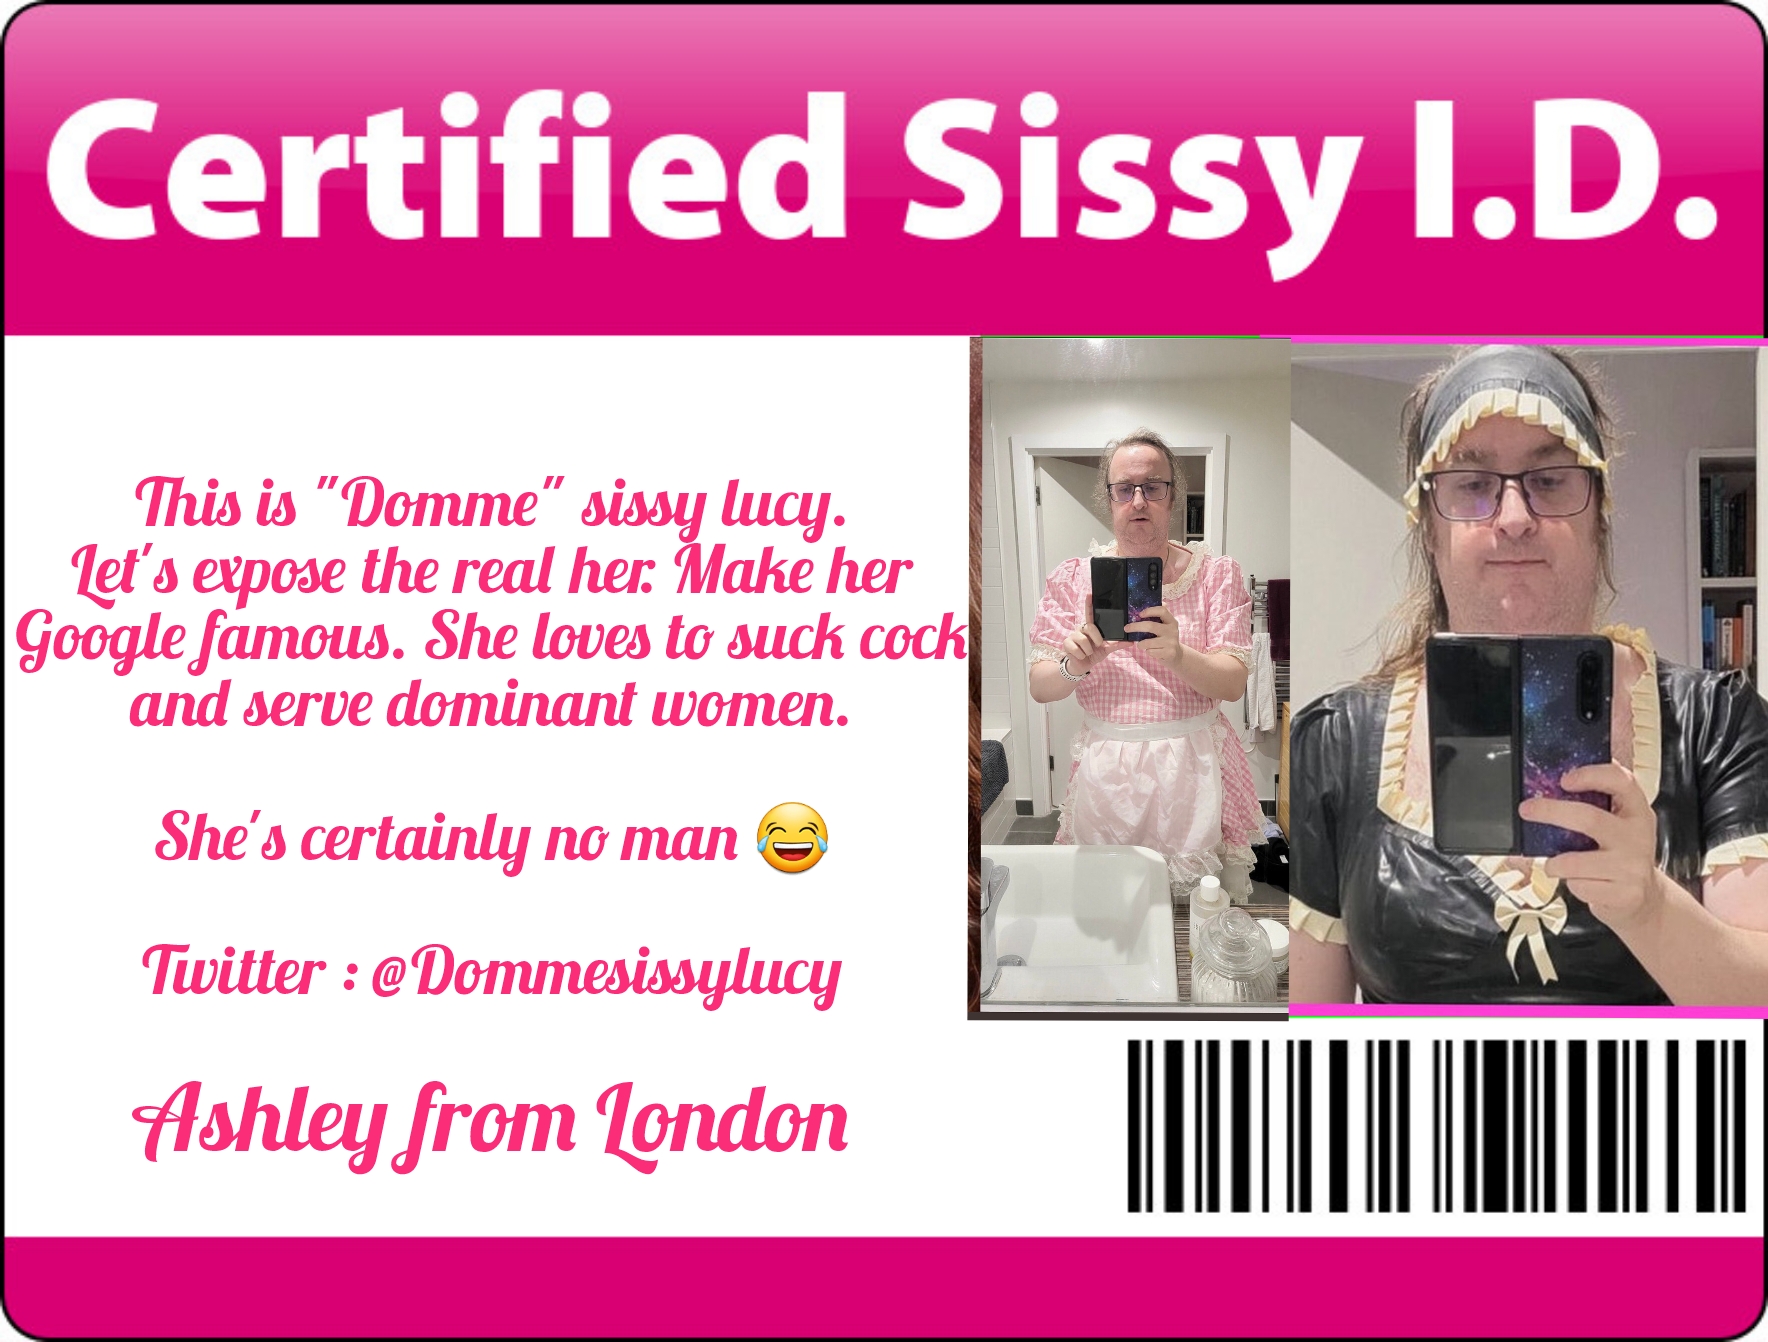 Exposed Sissy: Say hello to Sissy Lucy!